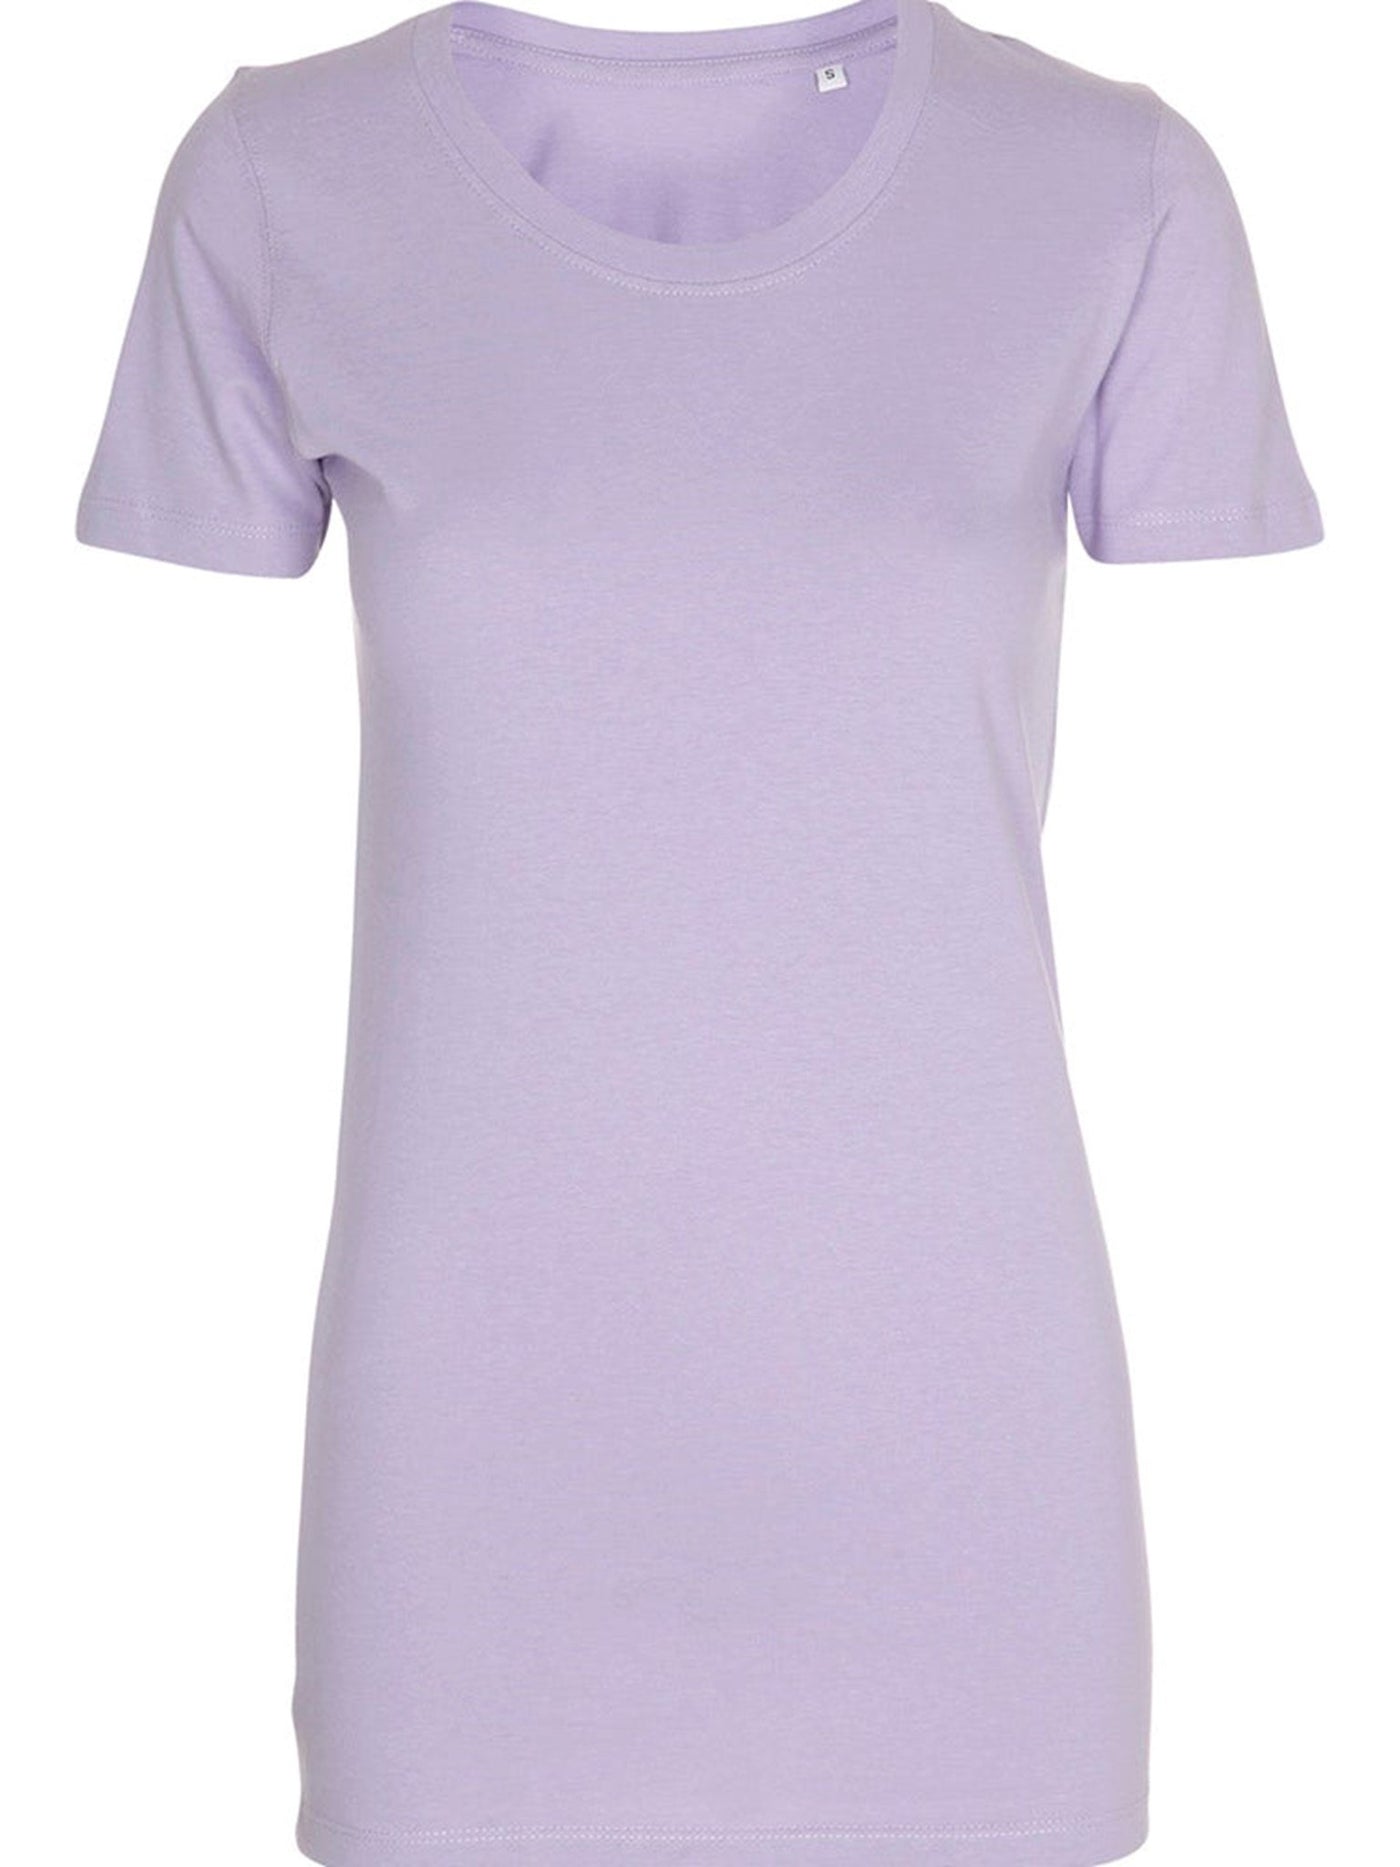 Fitted t-shirt - TeeShoppen - Lilla 5